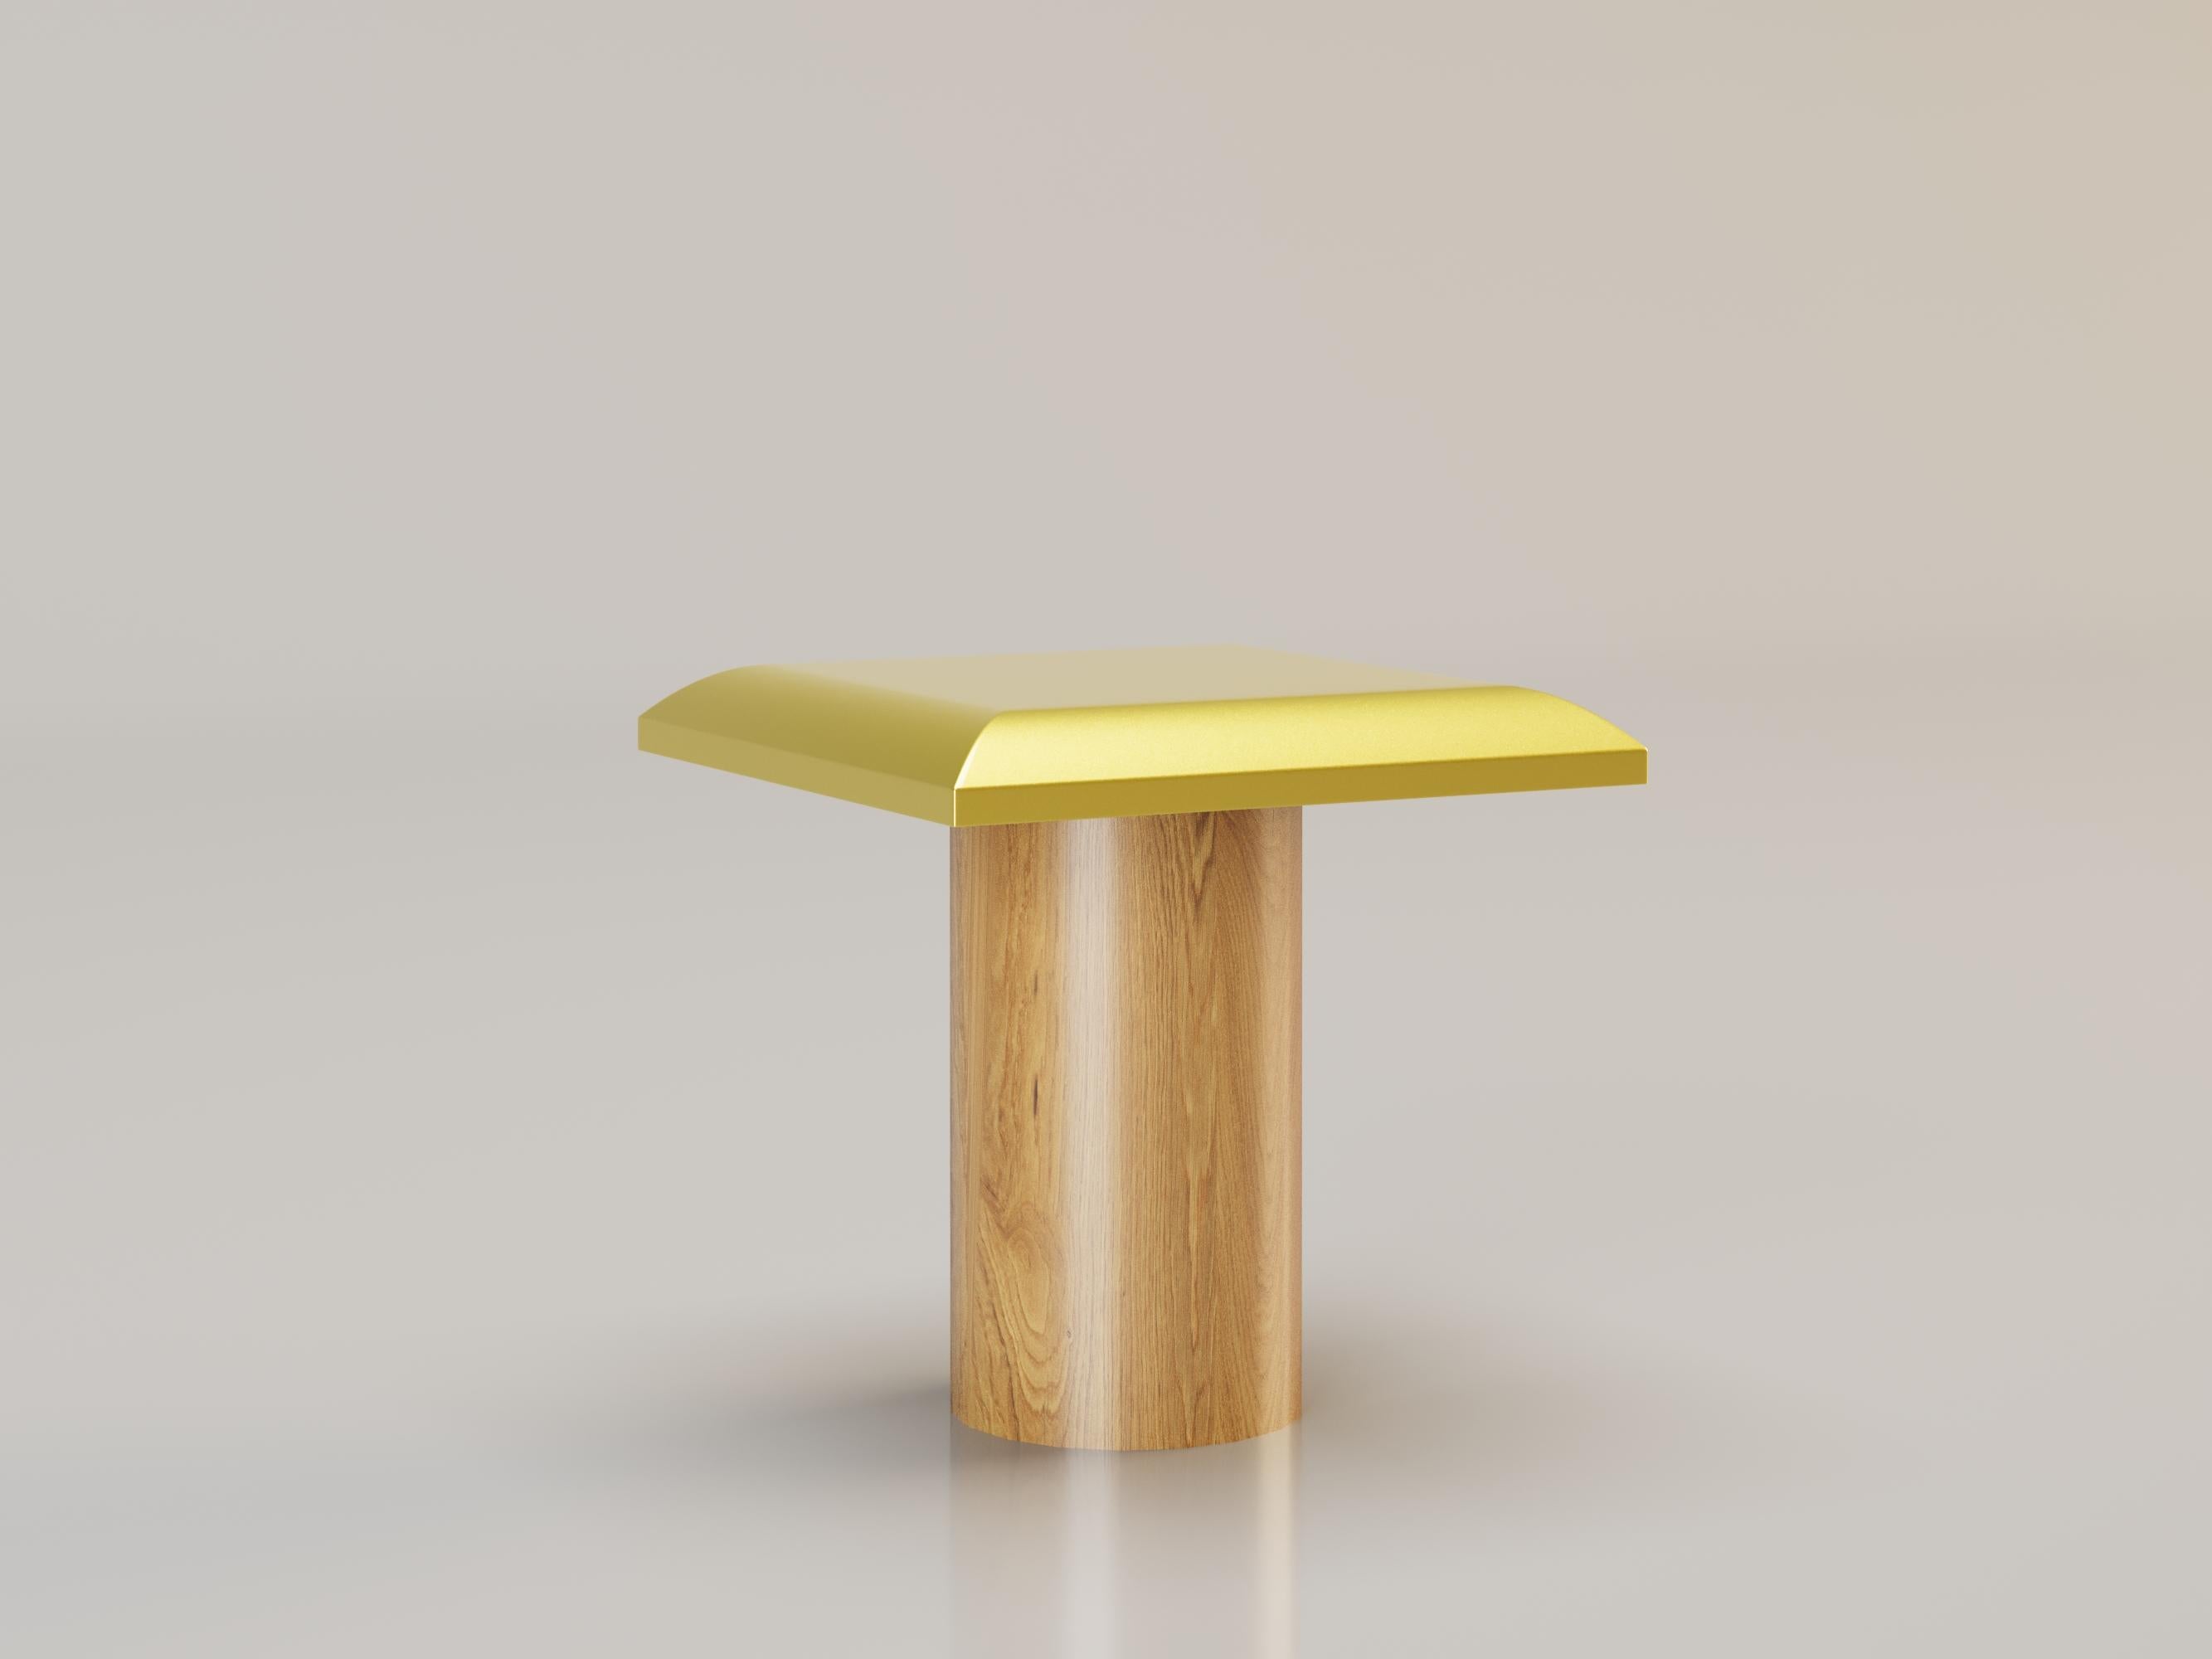 L'ENJOUÉ Stool by Alexandre Ligios

Oak Wood and Resin

L 16 x H 17 x D 16

The stool elegantly combines solid cylindrical oak for its base with a metal seat, seamlessly merging natural robustness with industrial modernity. Its minimalist design